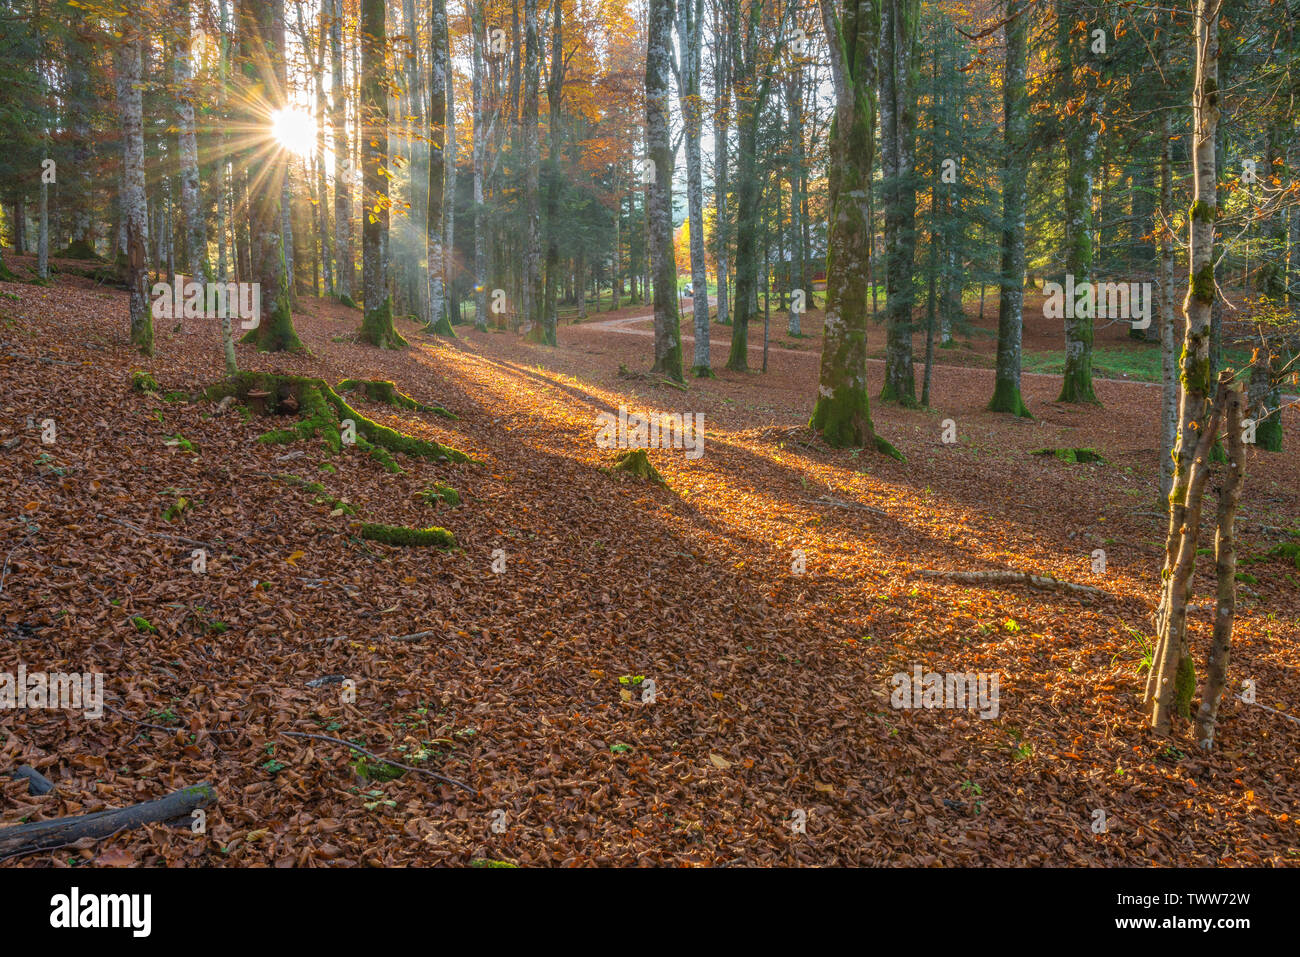 Sun setting through the trees in a beech forest in Cansiglio, Italy. October foliage, dead leaves carpet, mossy white bark trees. Tree shadows. Stock Photo